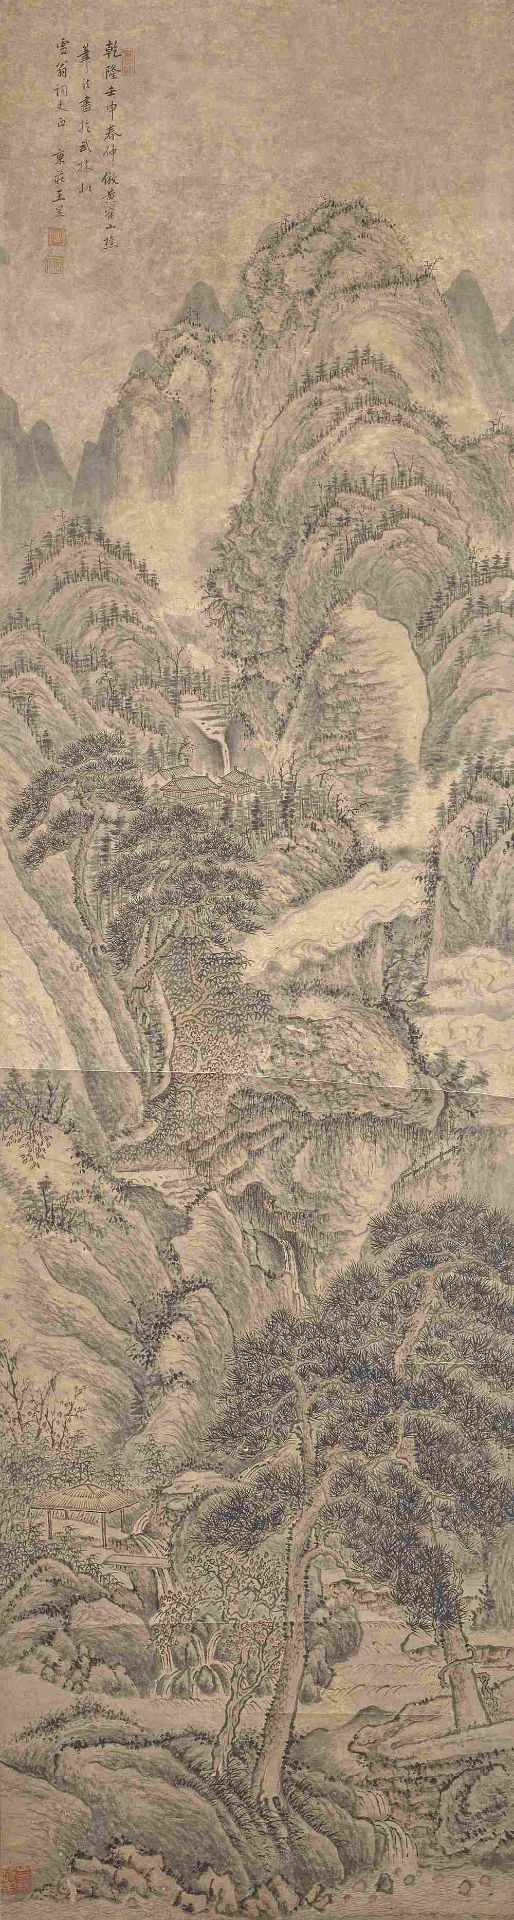 ATTRIBUTED TO WANG YU (1714-1748) Landscape